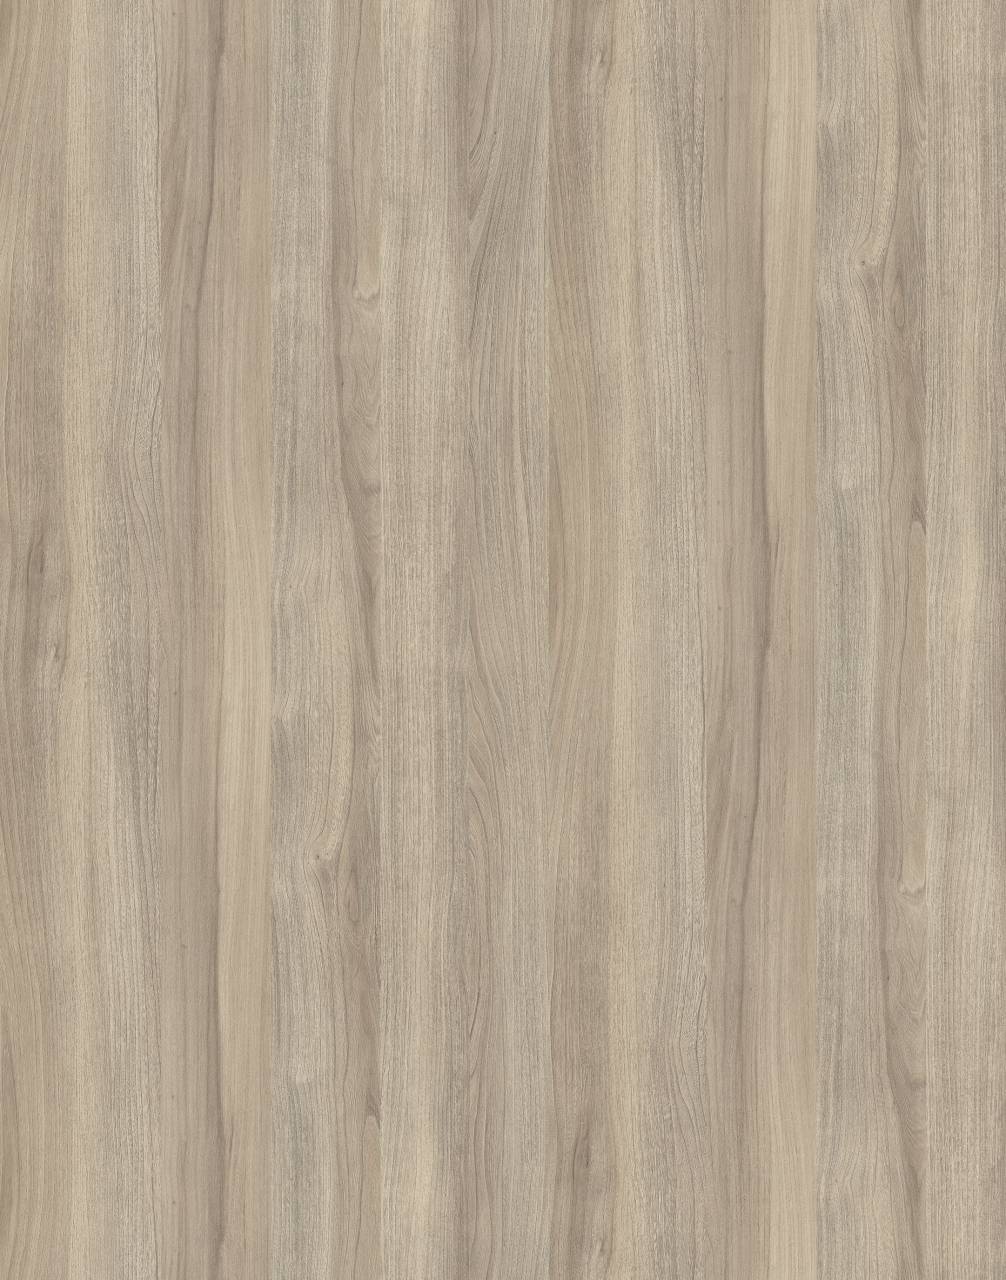 Blonde Liberty Elm PW HPL with textured surface and light pale brown tones for a light and airy look.